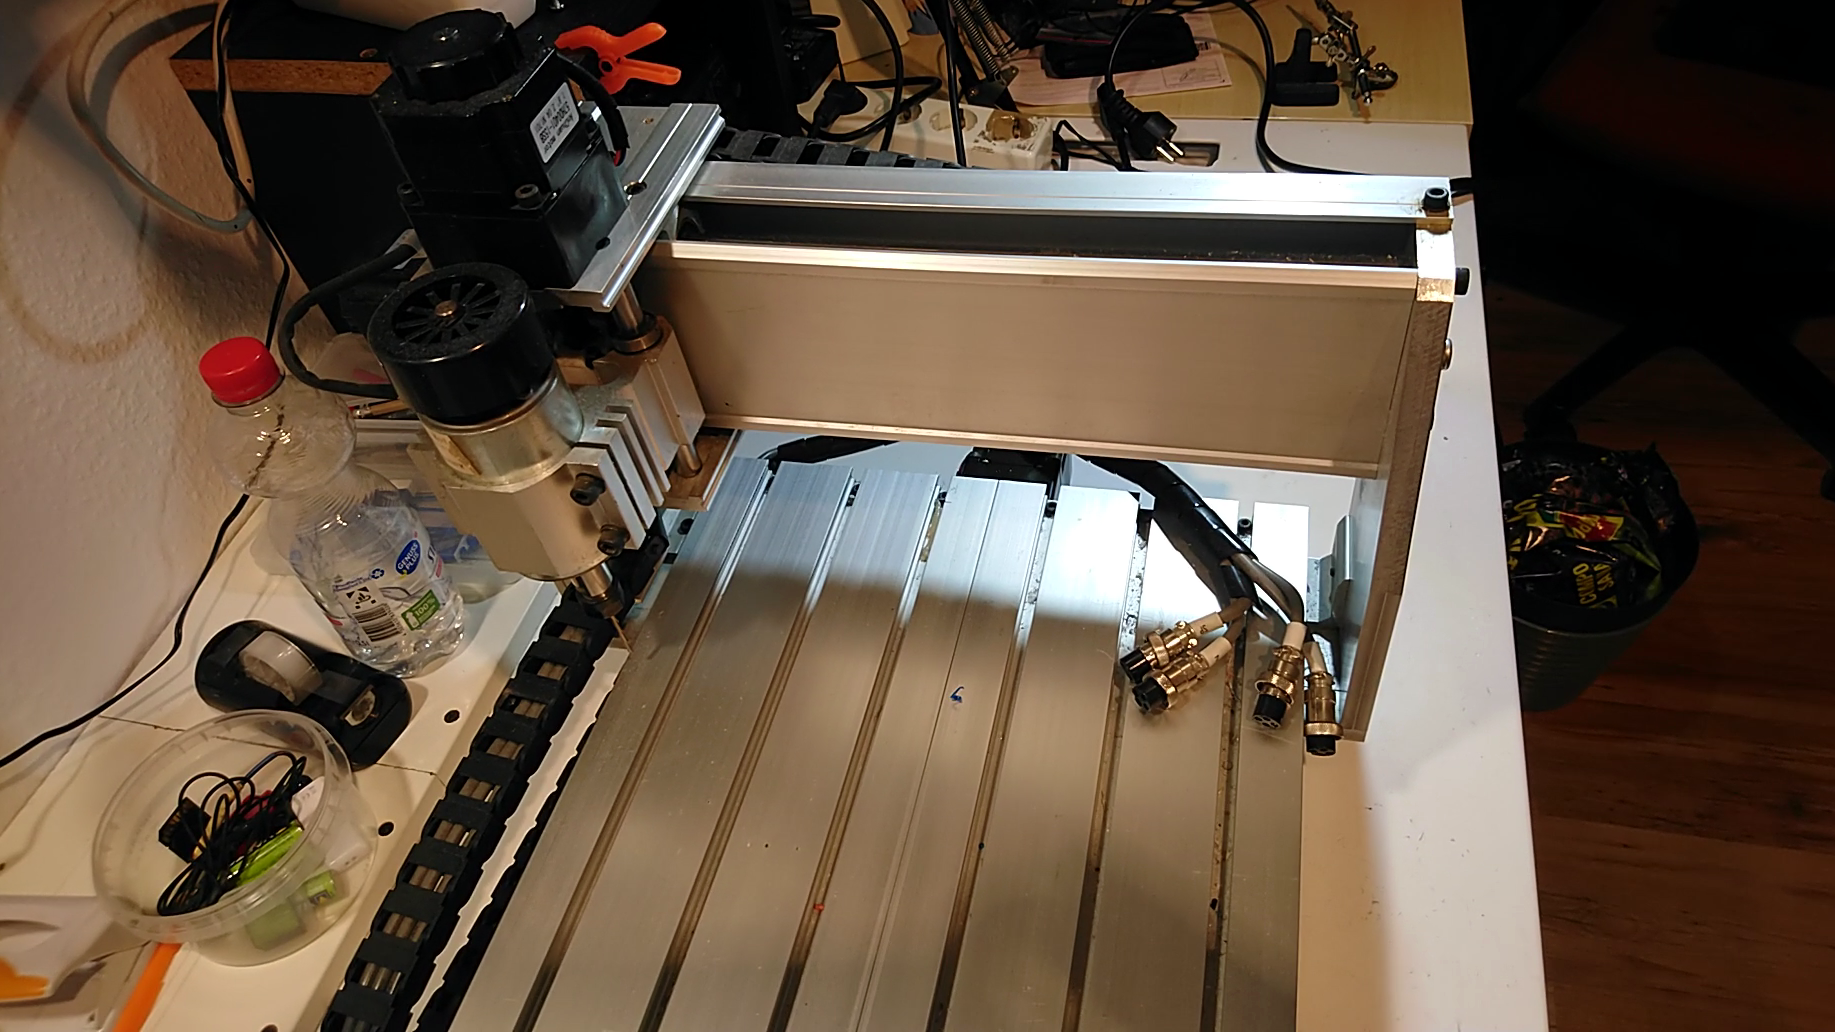 Impulse Buying A 3040 CNC Machine, What Could Go Wrong?